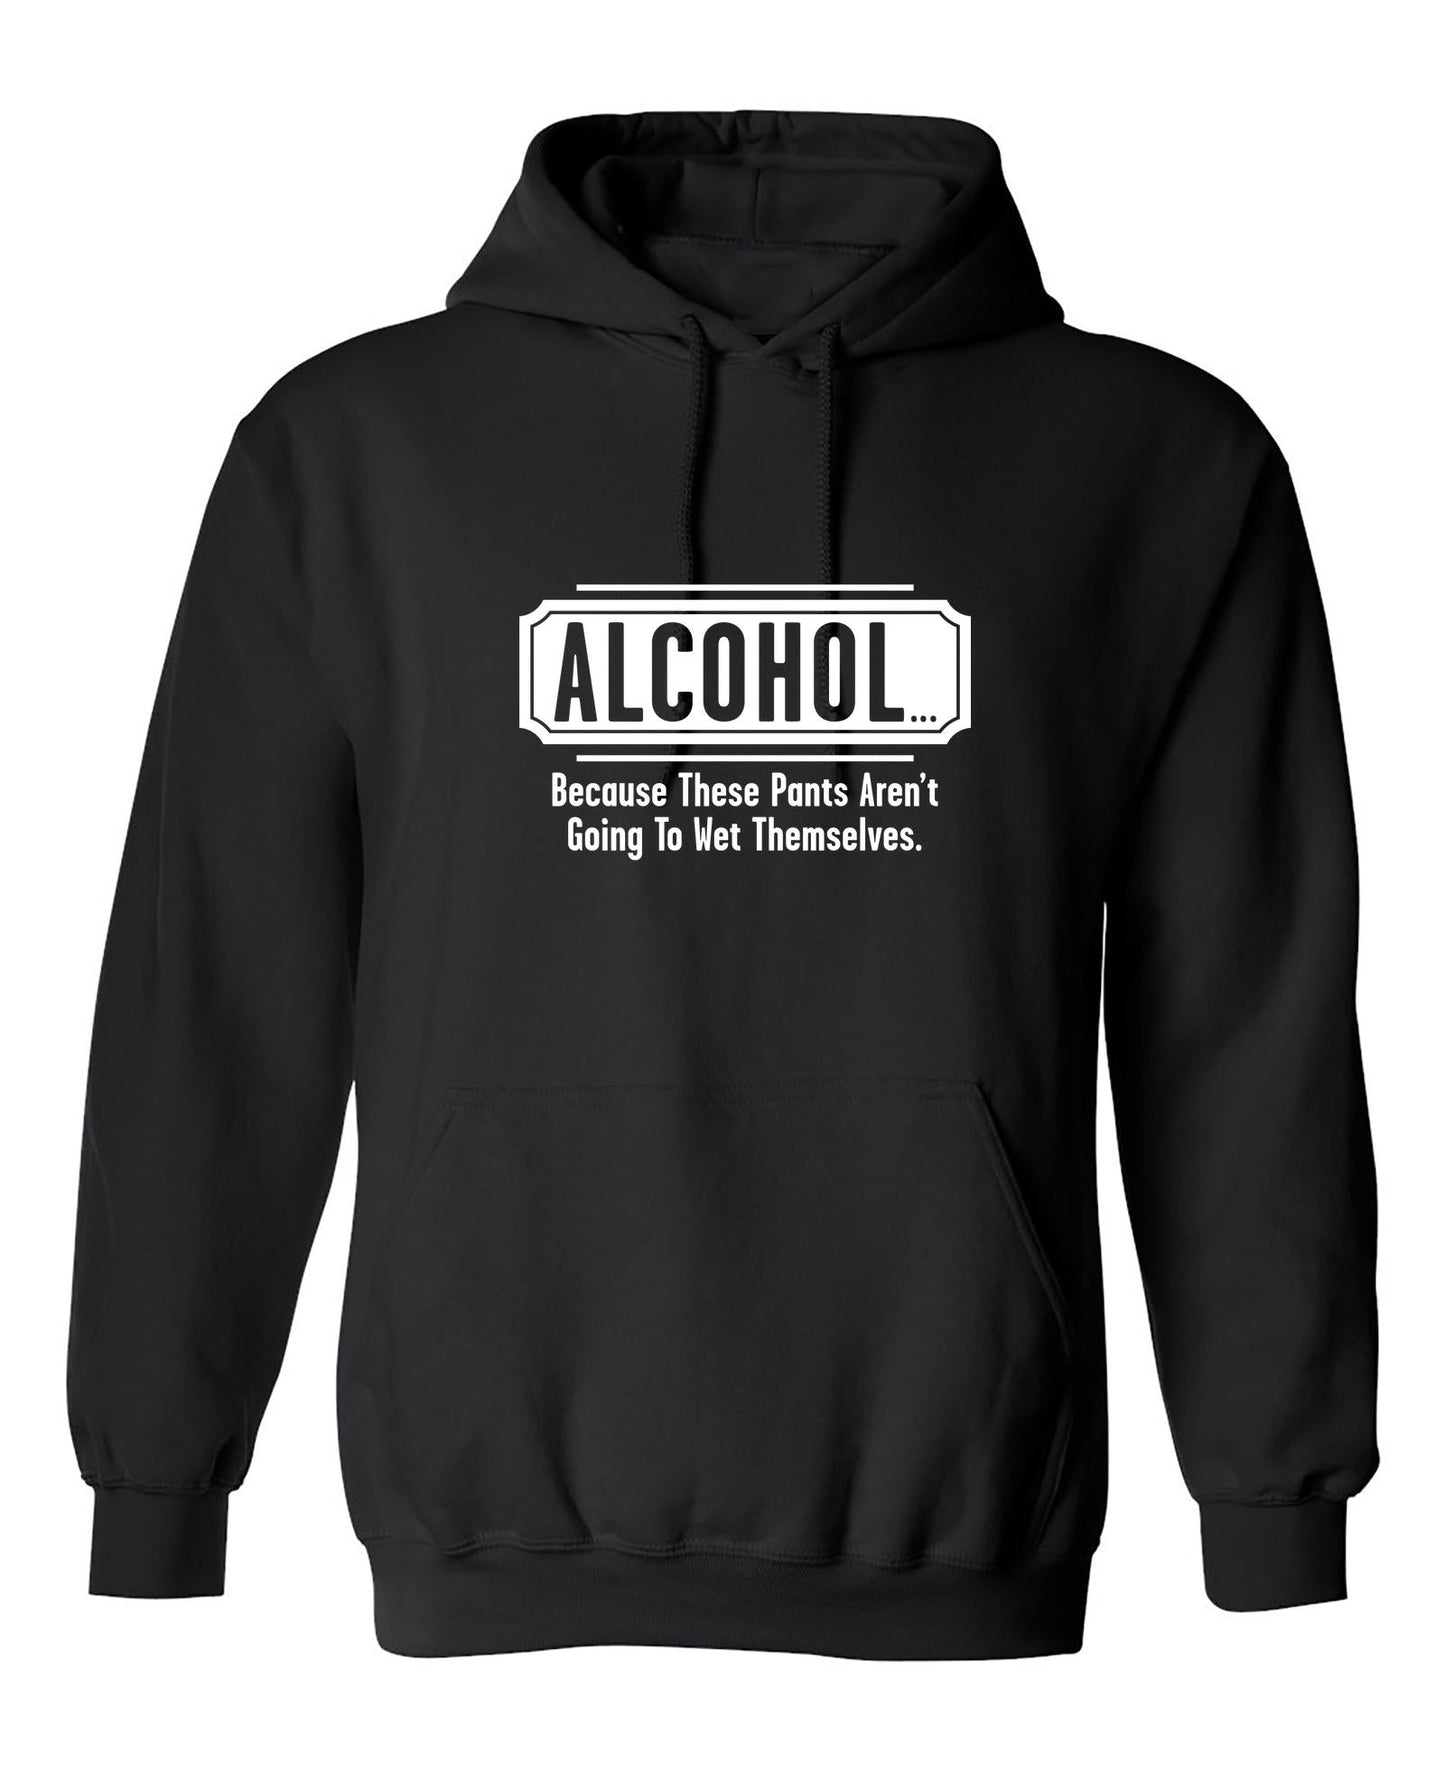 Funny T-Shirts design "Alcohol - Because These Pants Aren't Going To Wet Themselves"